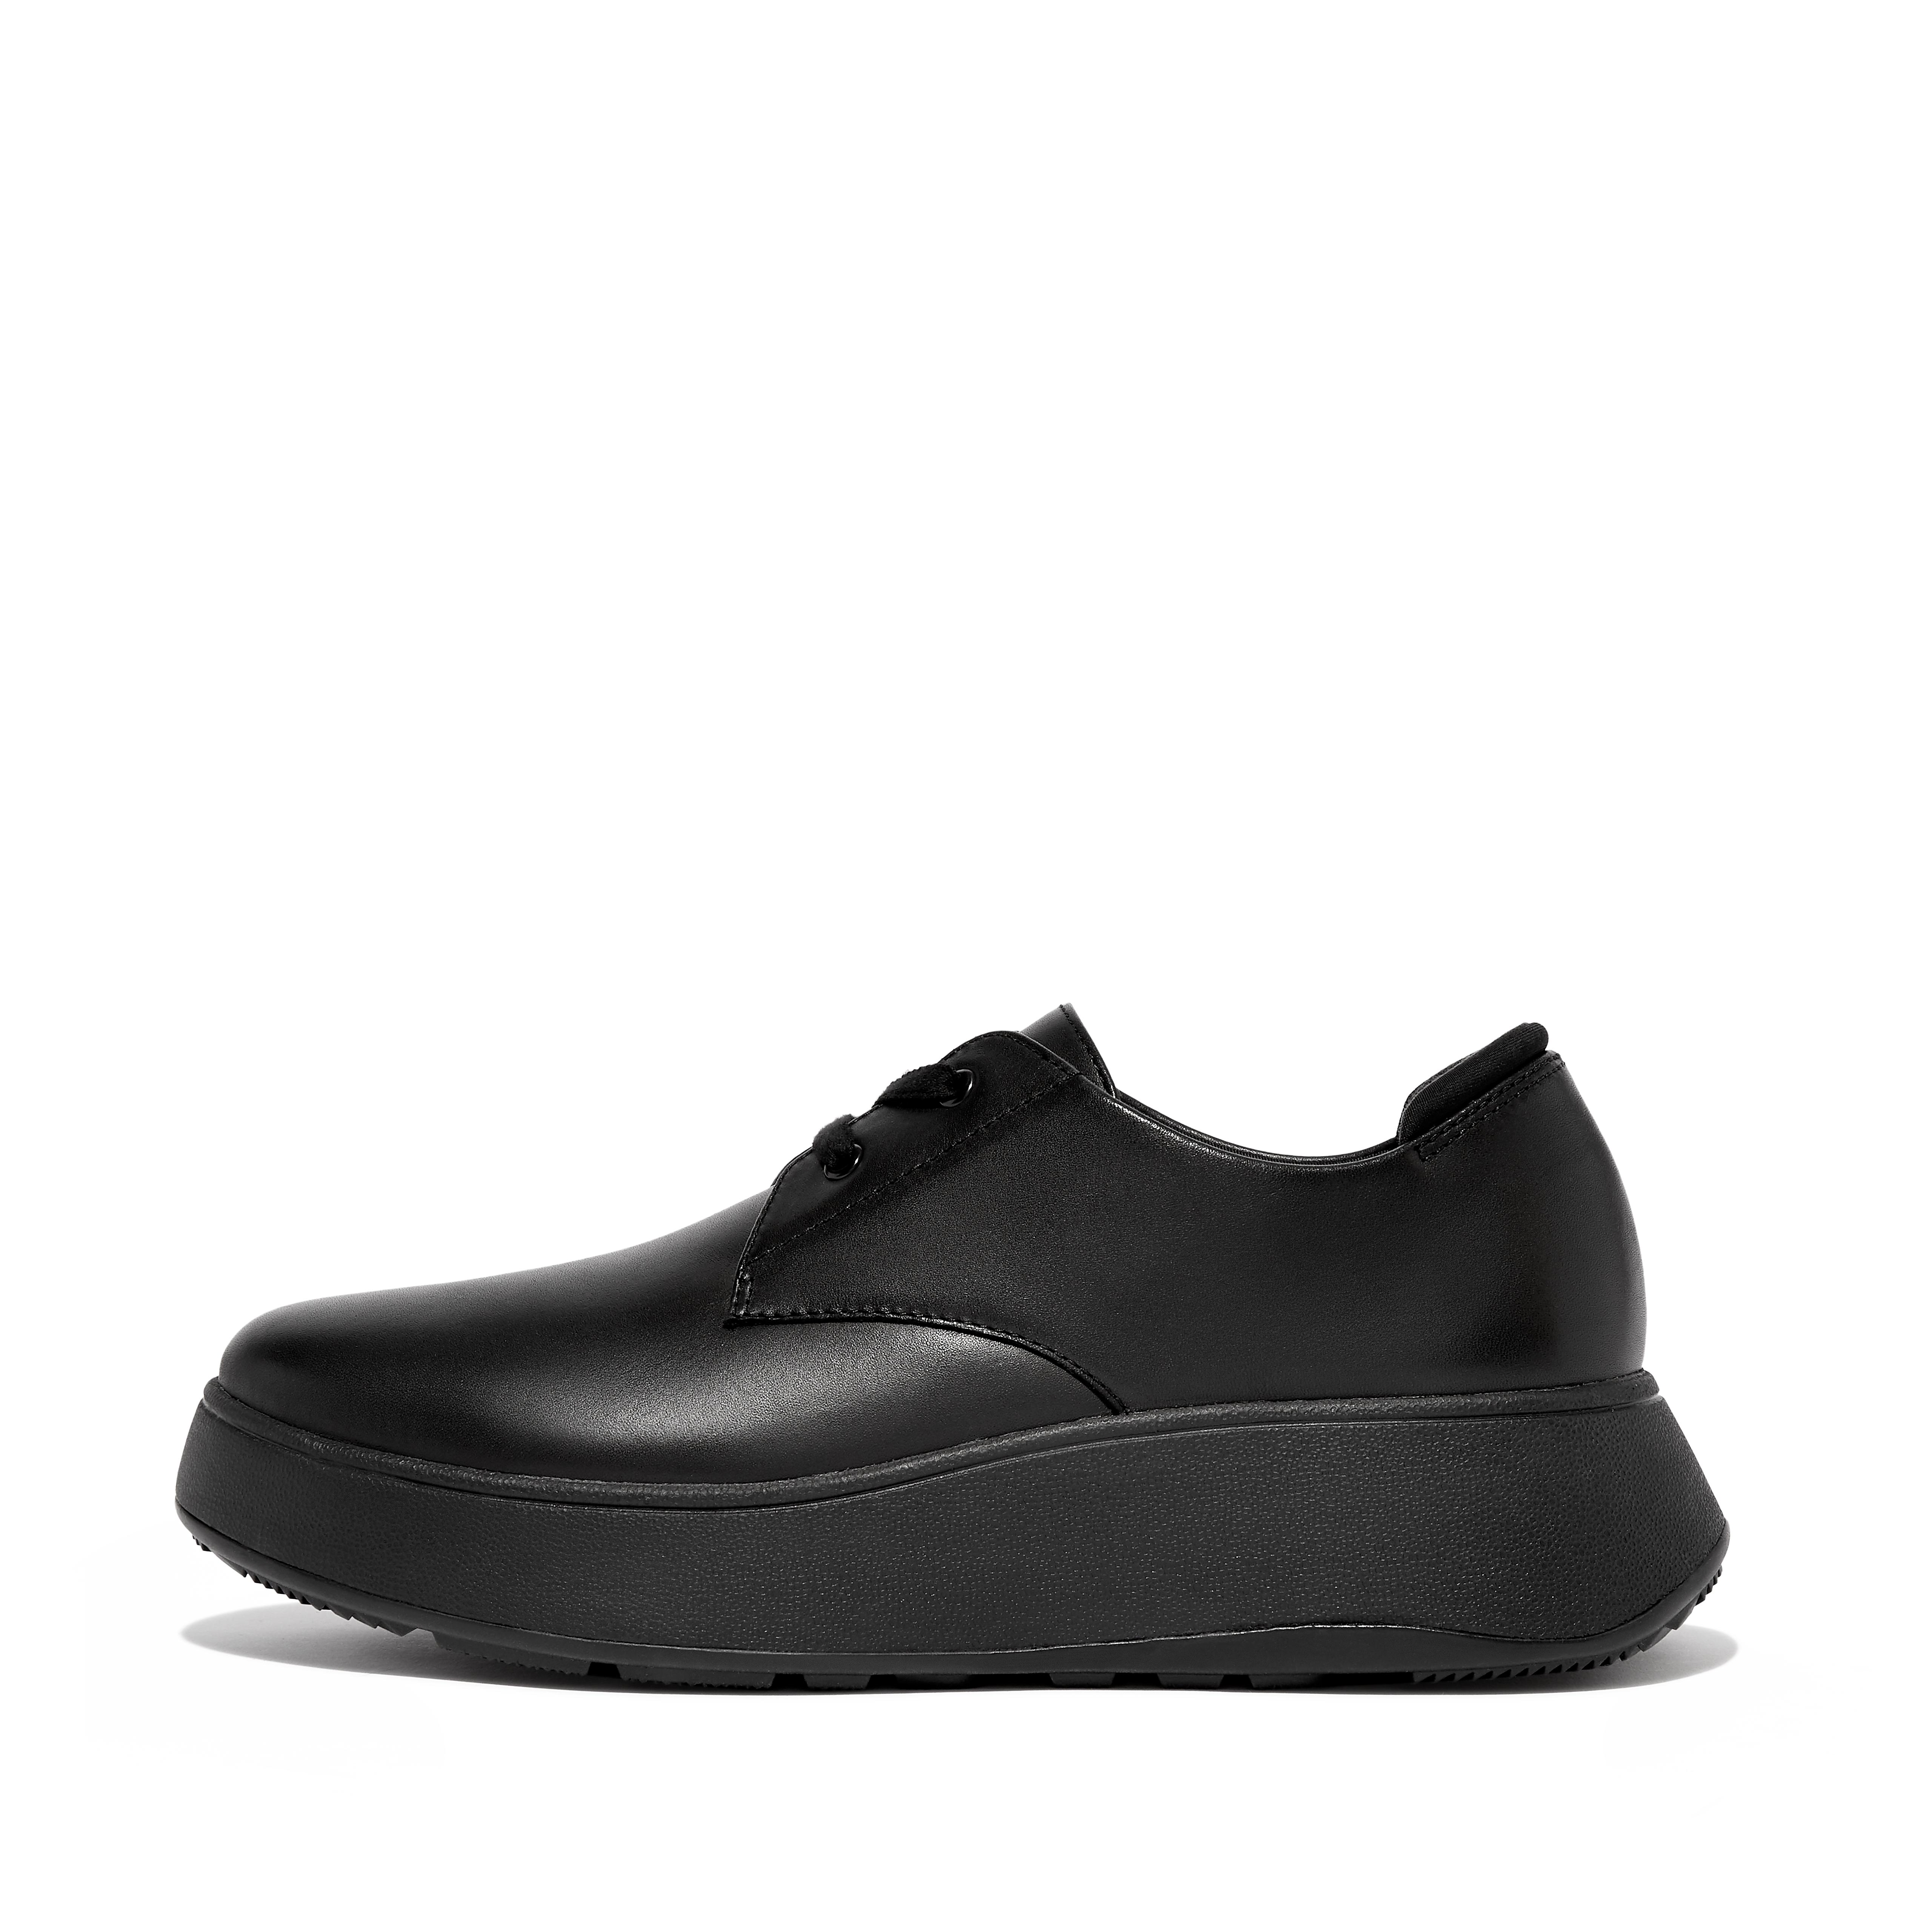 Fitflop Leather Flatform Lace-Up Derbies,All Black